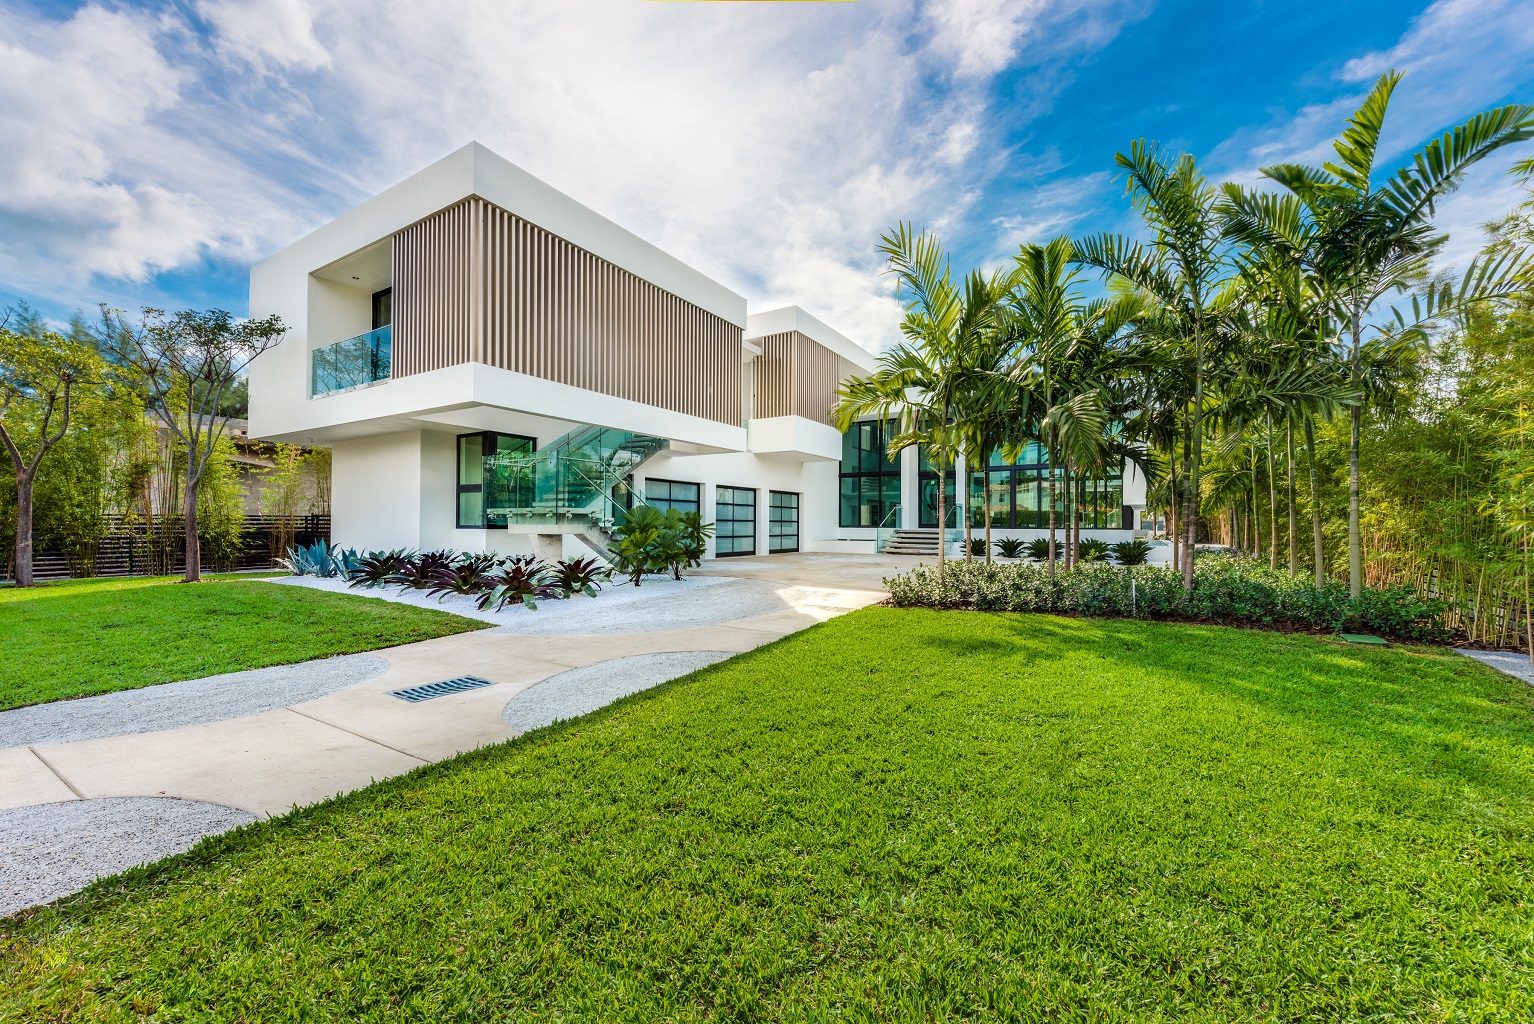 A modern build in miami beach with a large front yard and palm trees throughout.